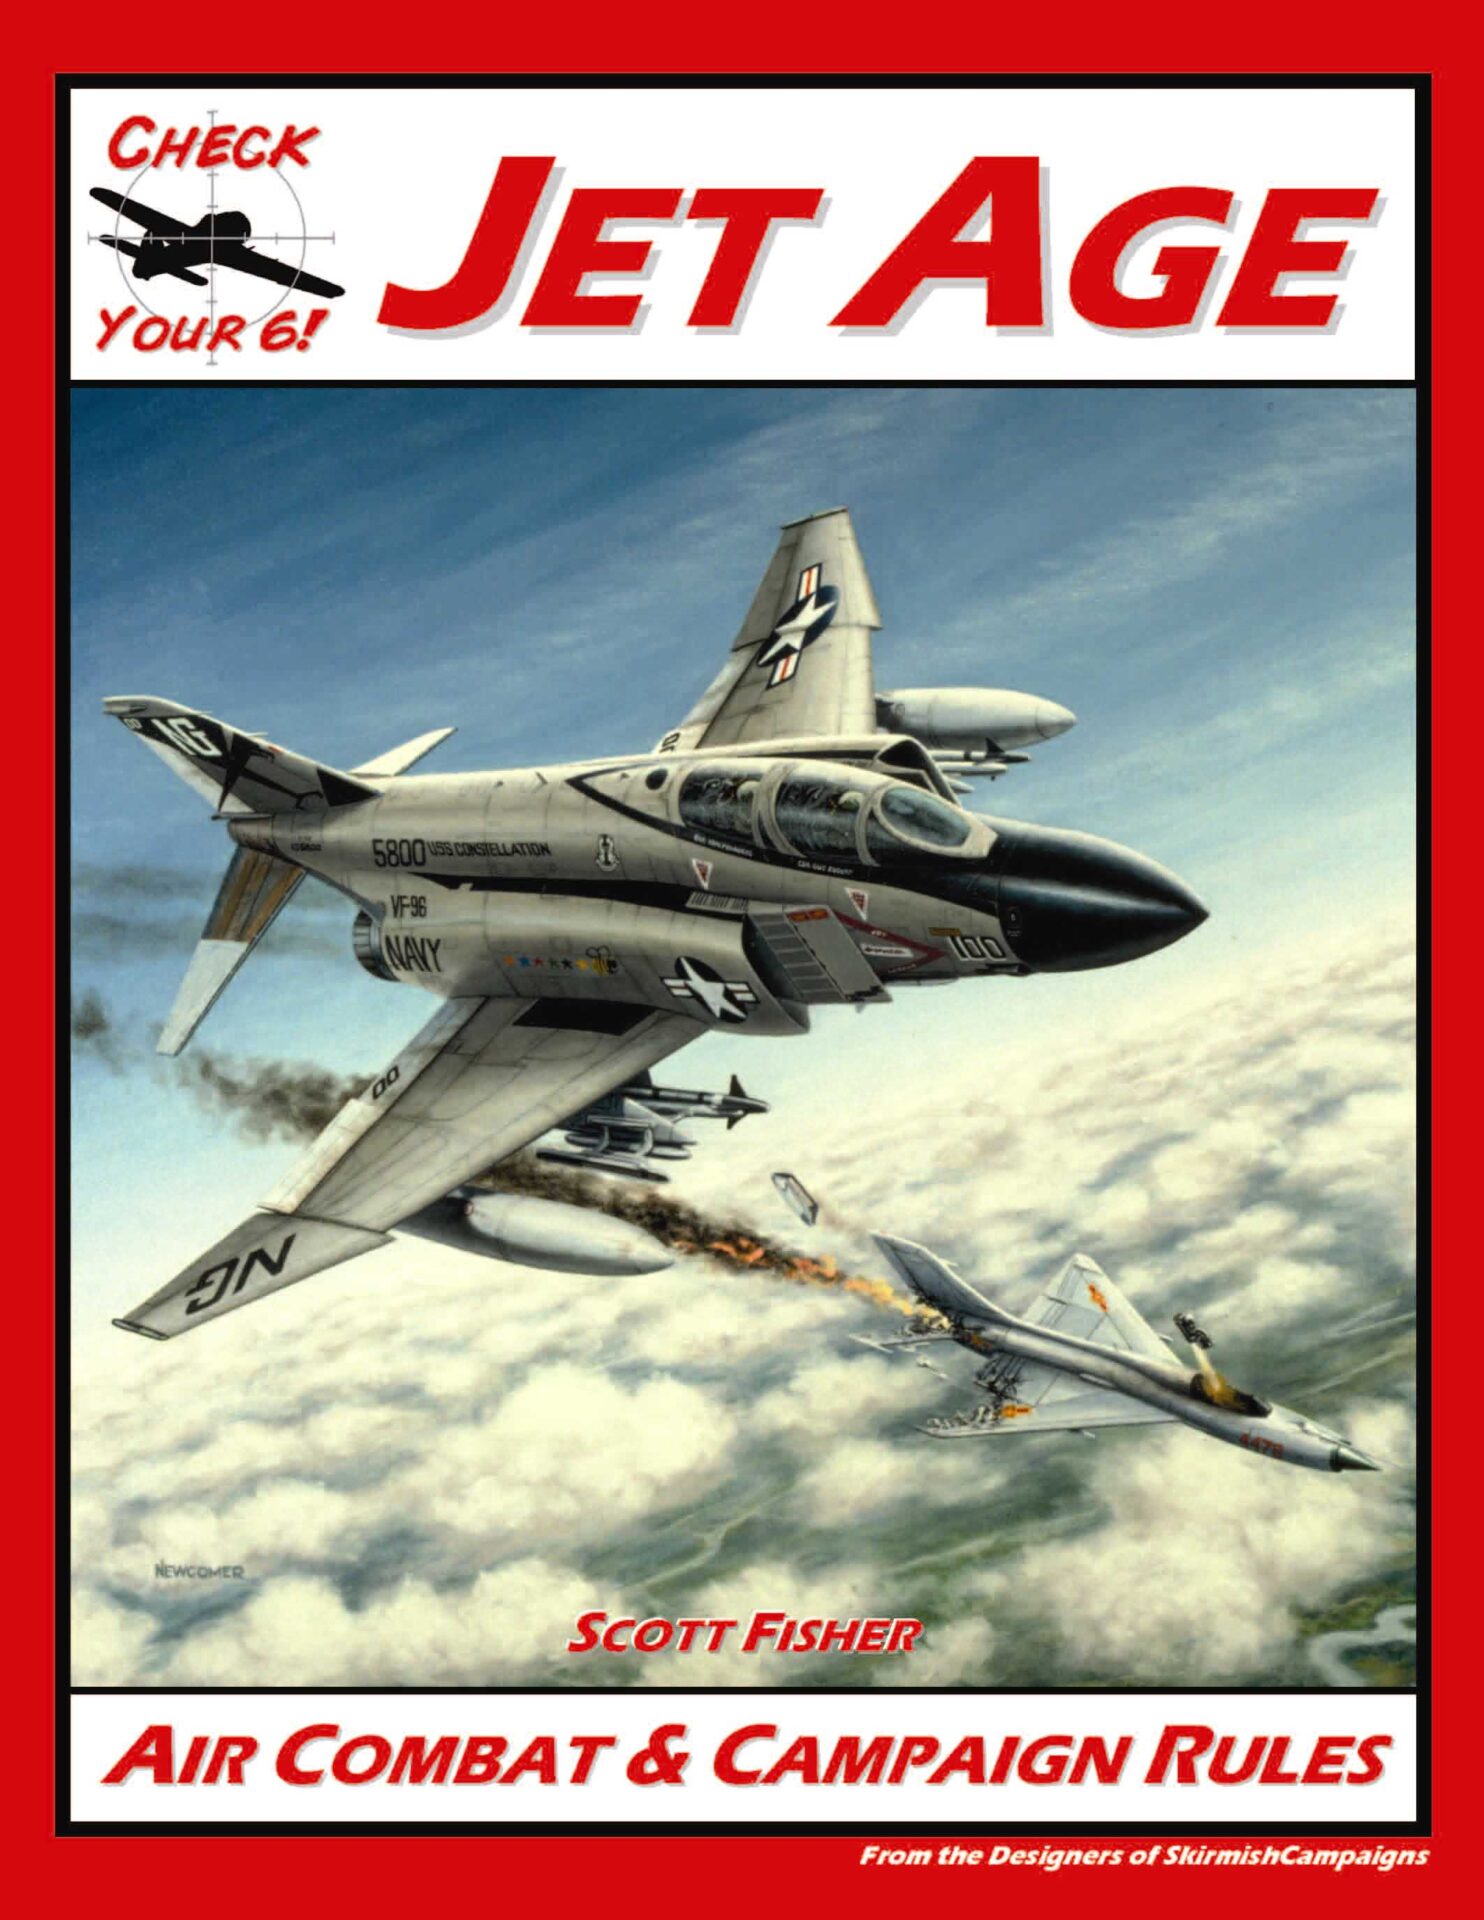 Check Your 6! JET AGE